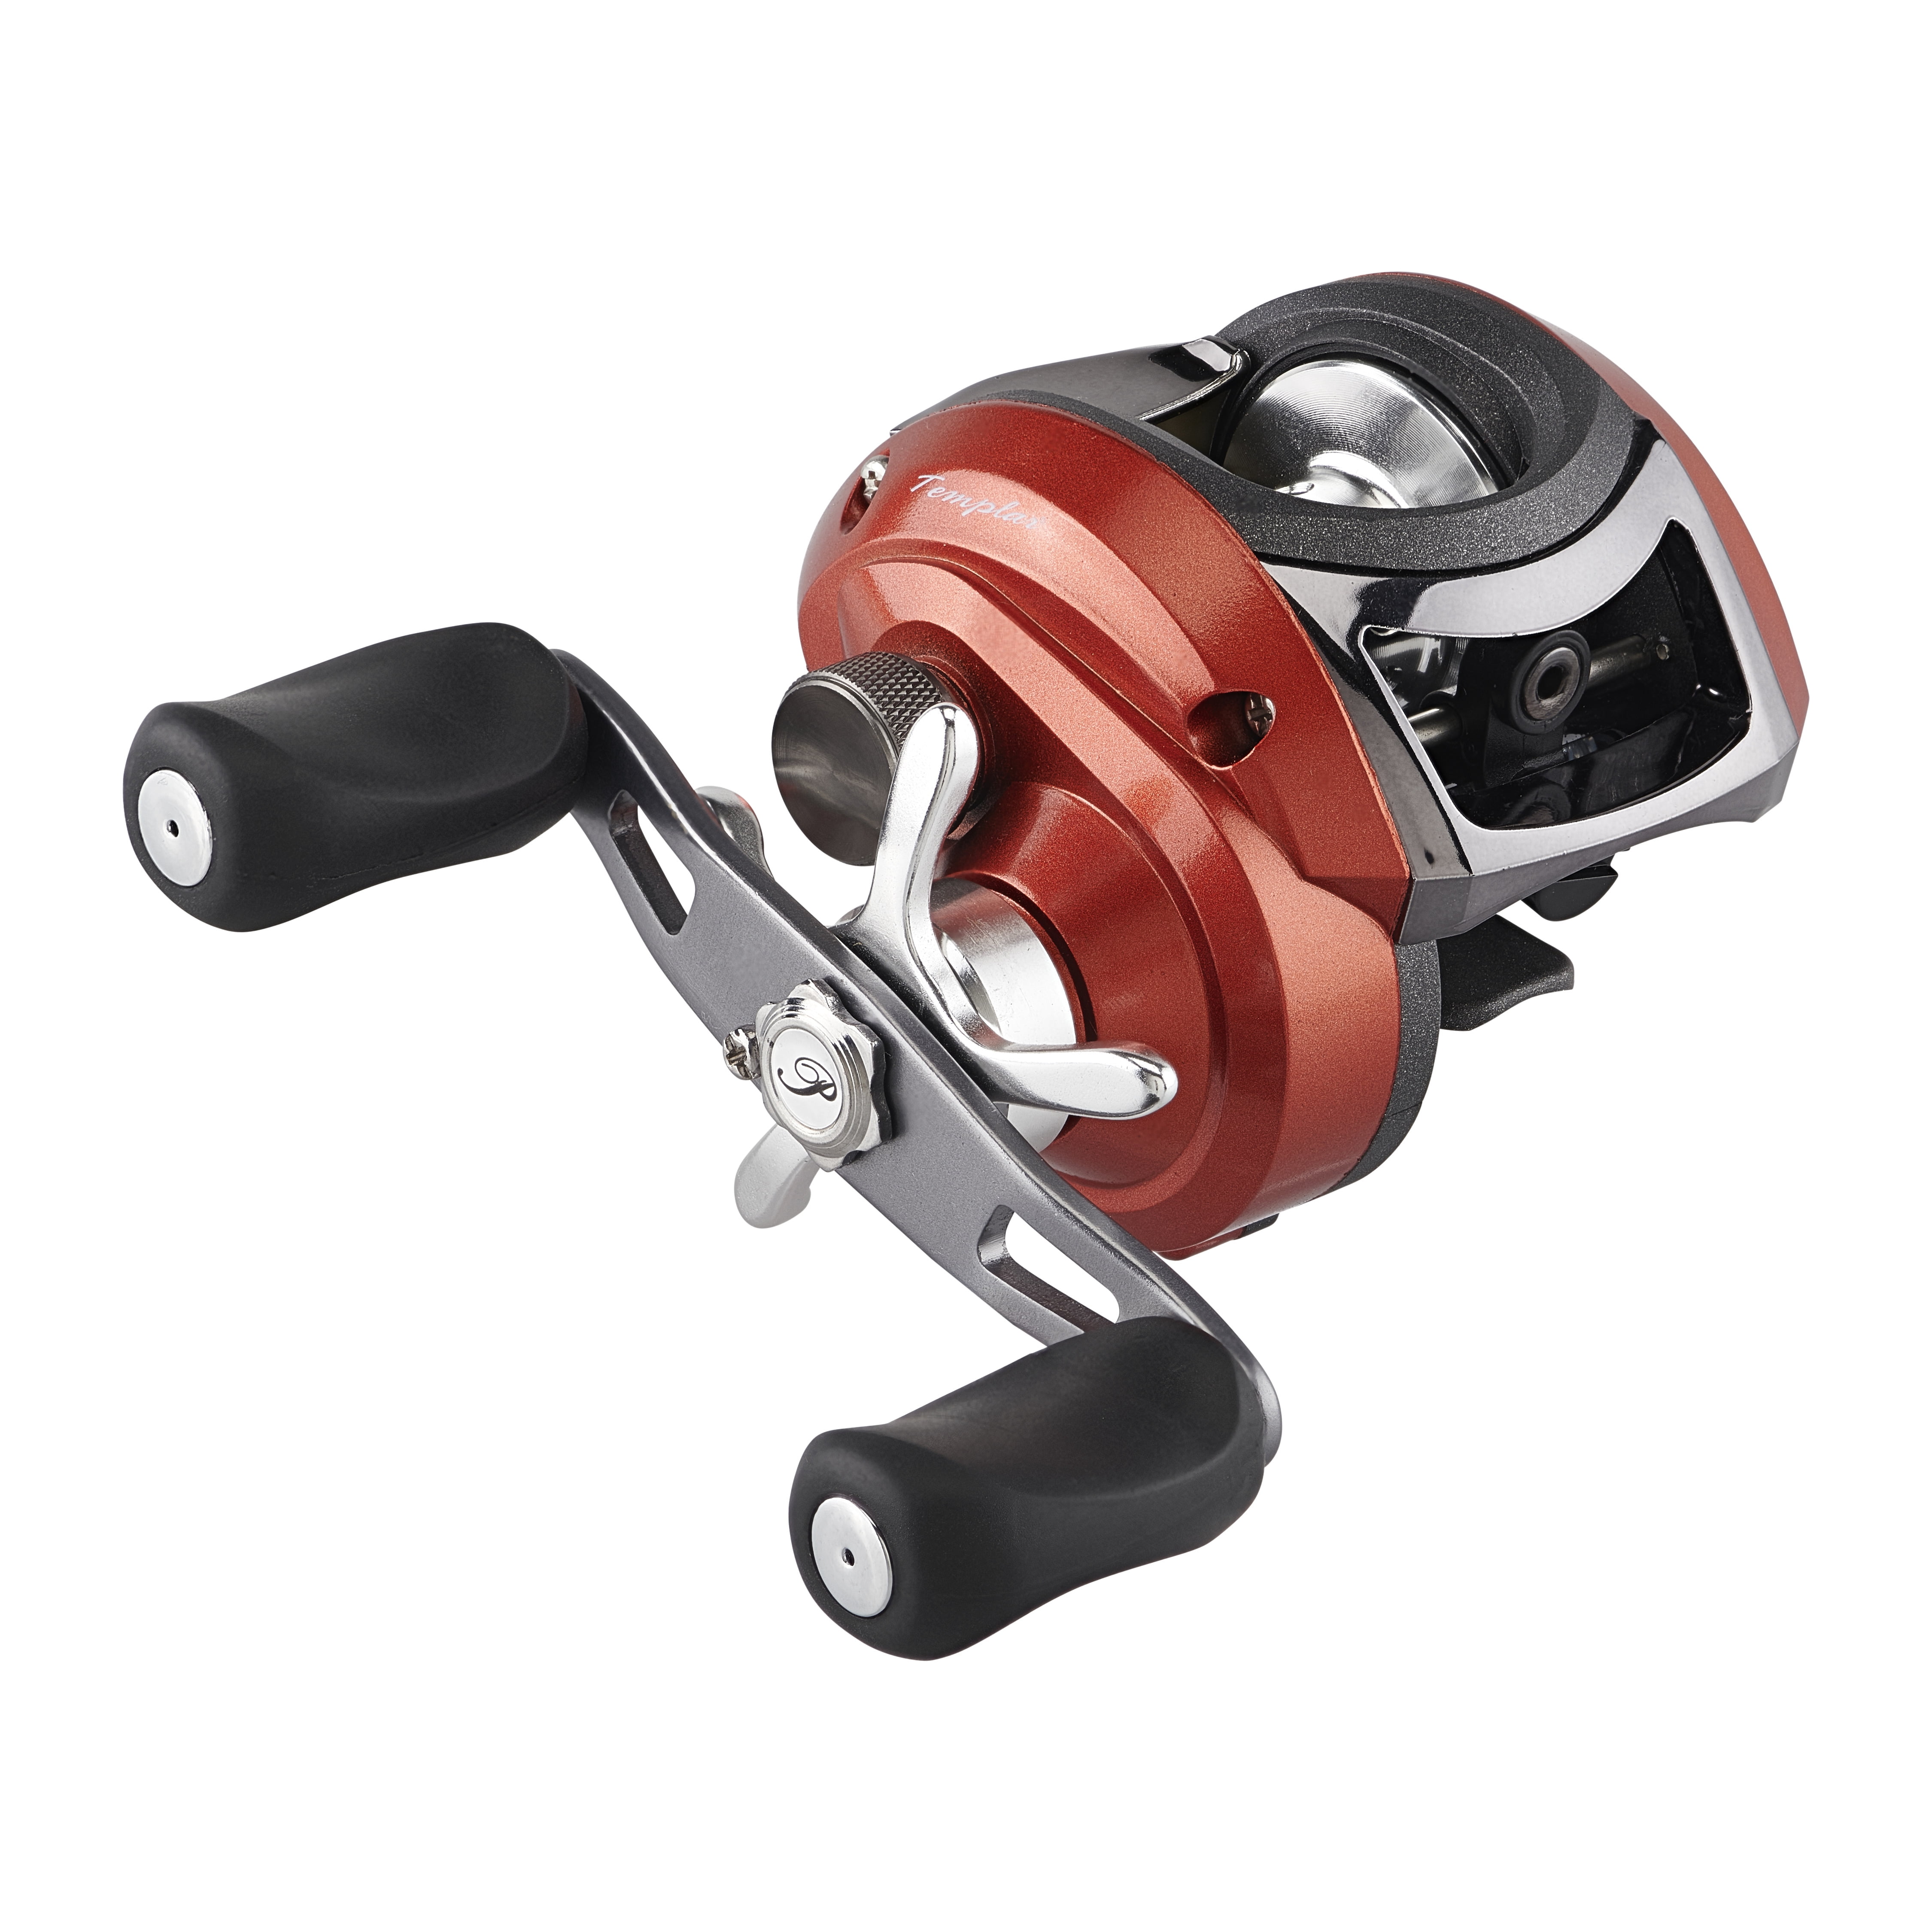 Pflueger Puriste PUR71LP 7.1 1 main droite Bait Casting Reel New in package 